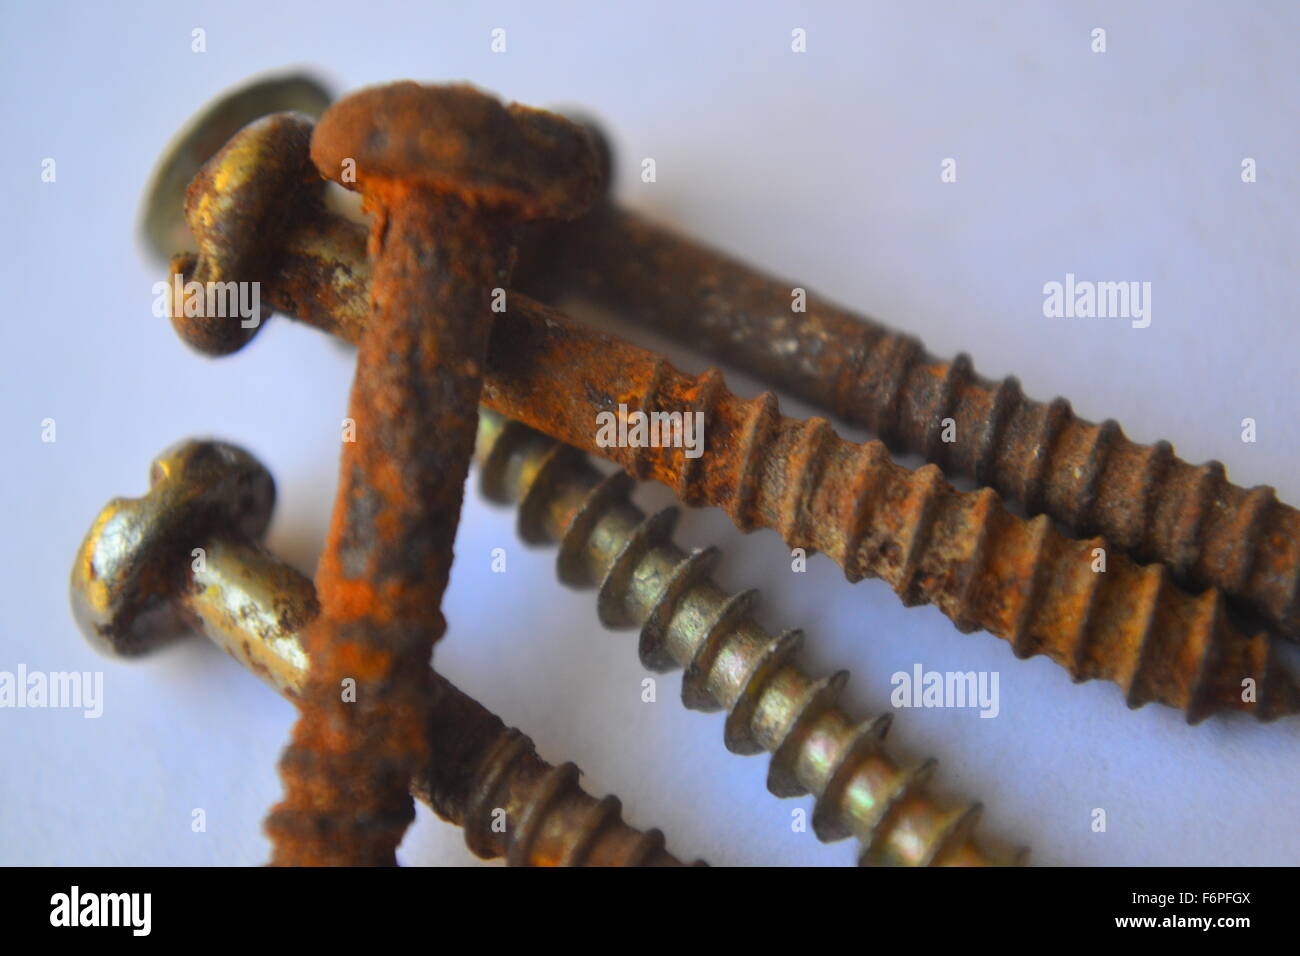 Rusty and Healthy Screws Stock Photo